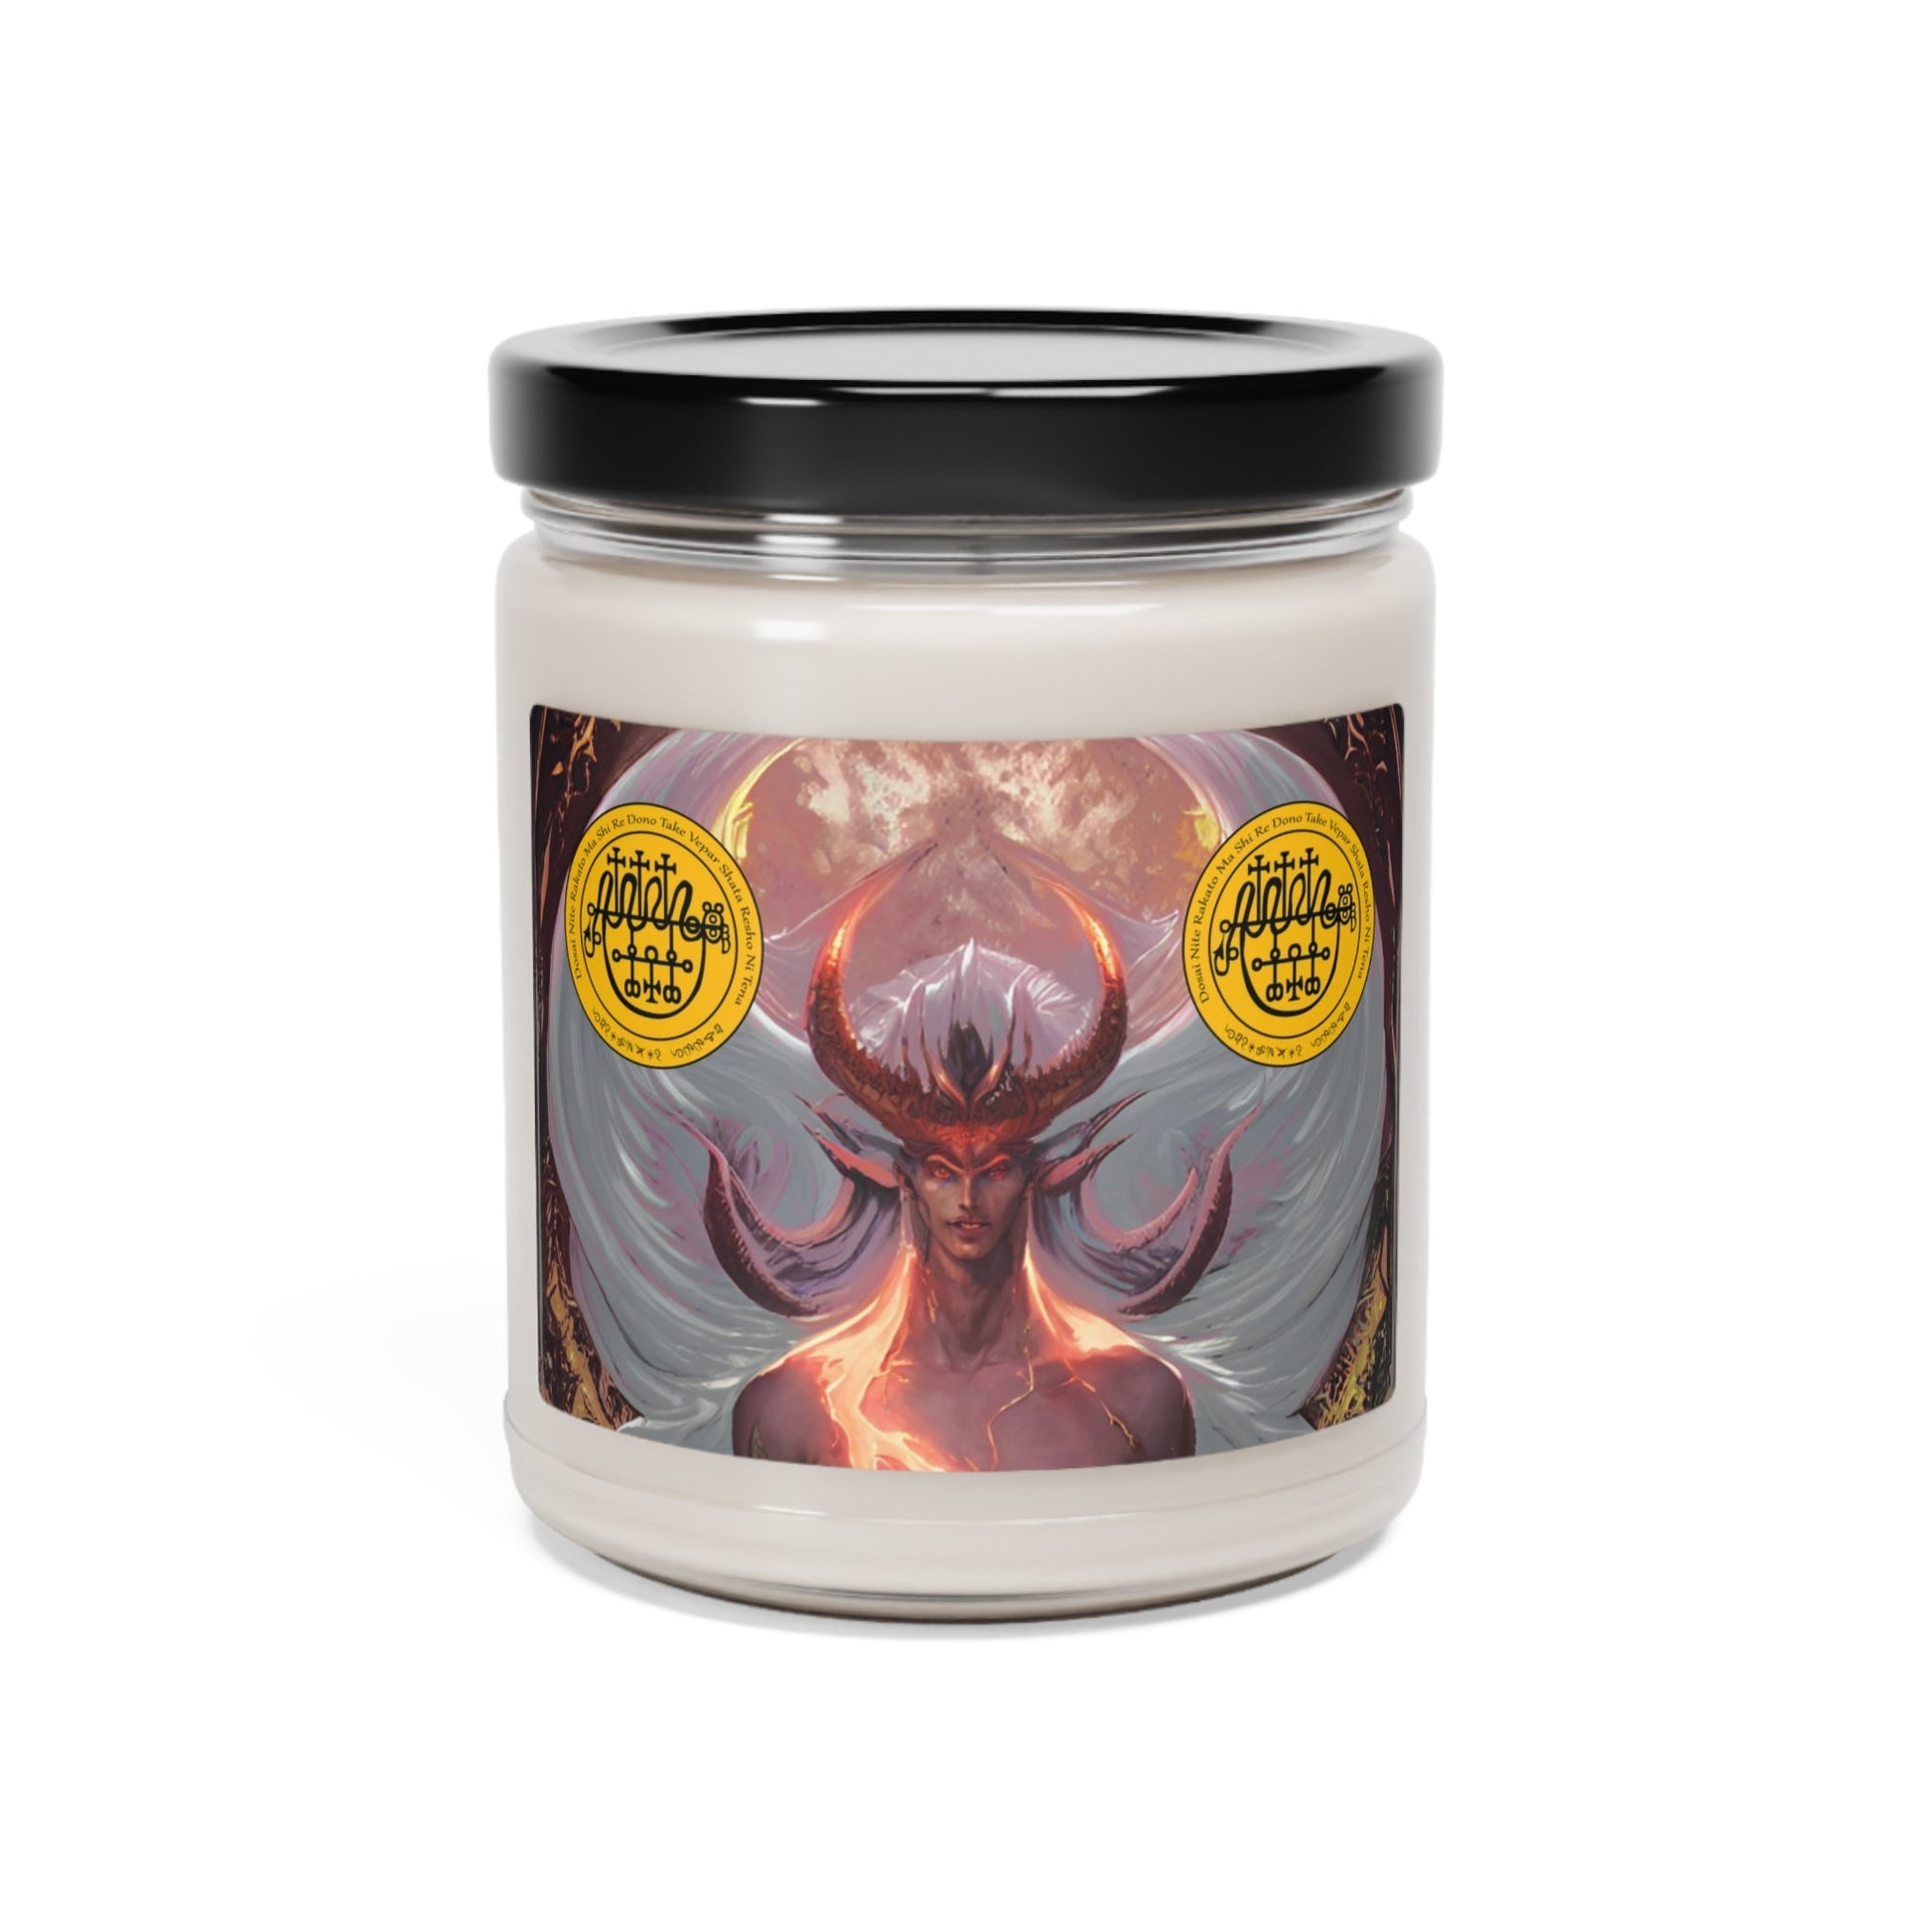 Demon-Vepar-Altar-Scented-Soy-Candle-for-offerings-rituals-initiations-or-praying-and-meditation-21